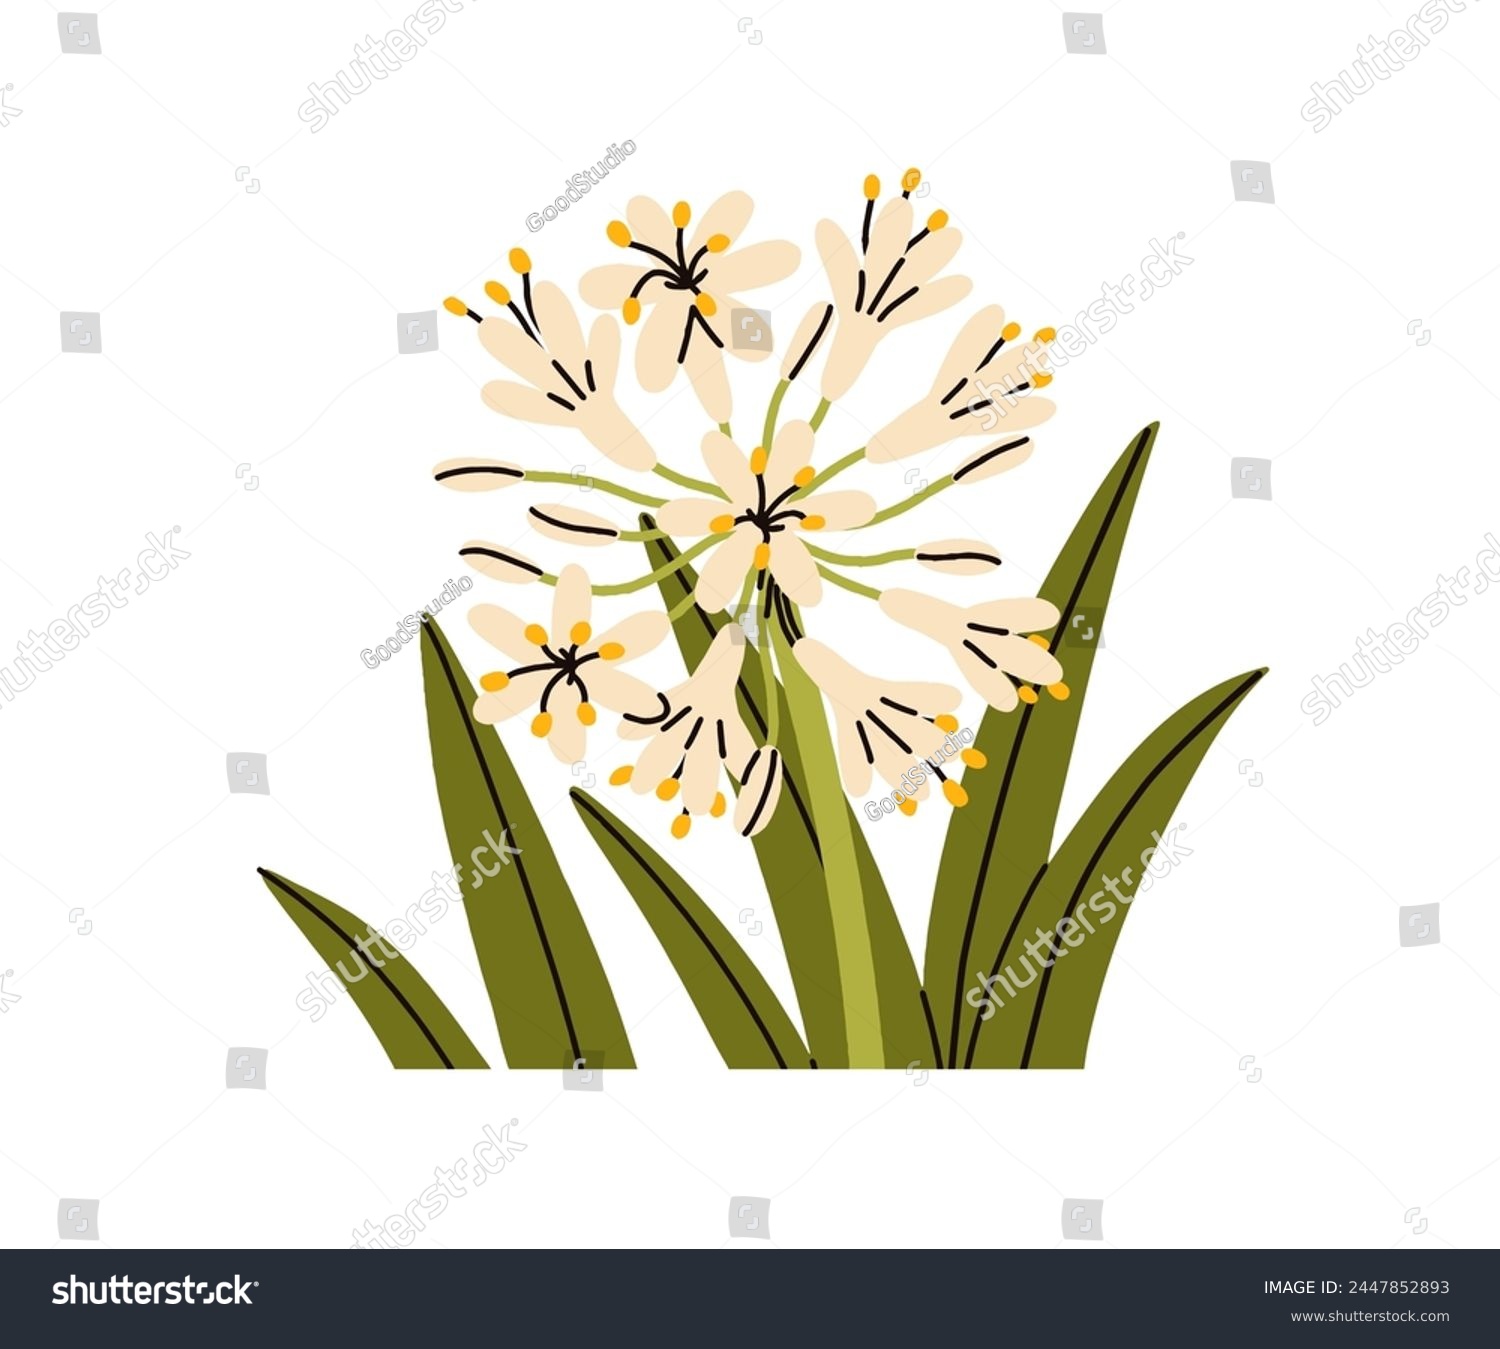 SVG of Flower bloom. Summer floral plant with leaf and buds. Delicate gentle African lily, Agapanthus orientalis. Beautiful wildflower. Botanical natural flat vector illustration isolated on white background svg